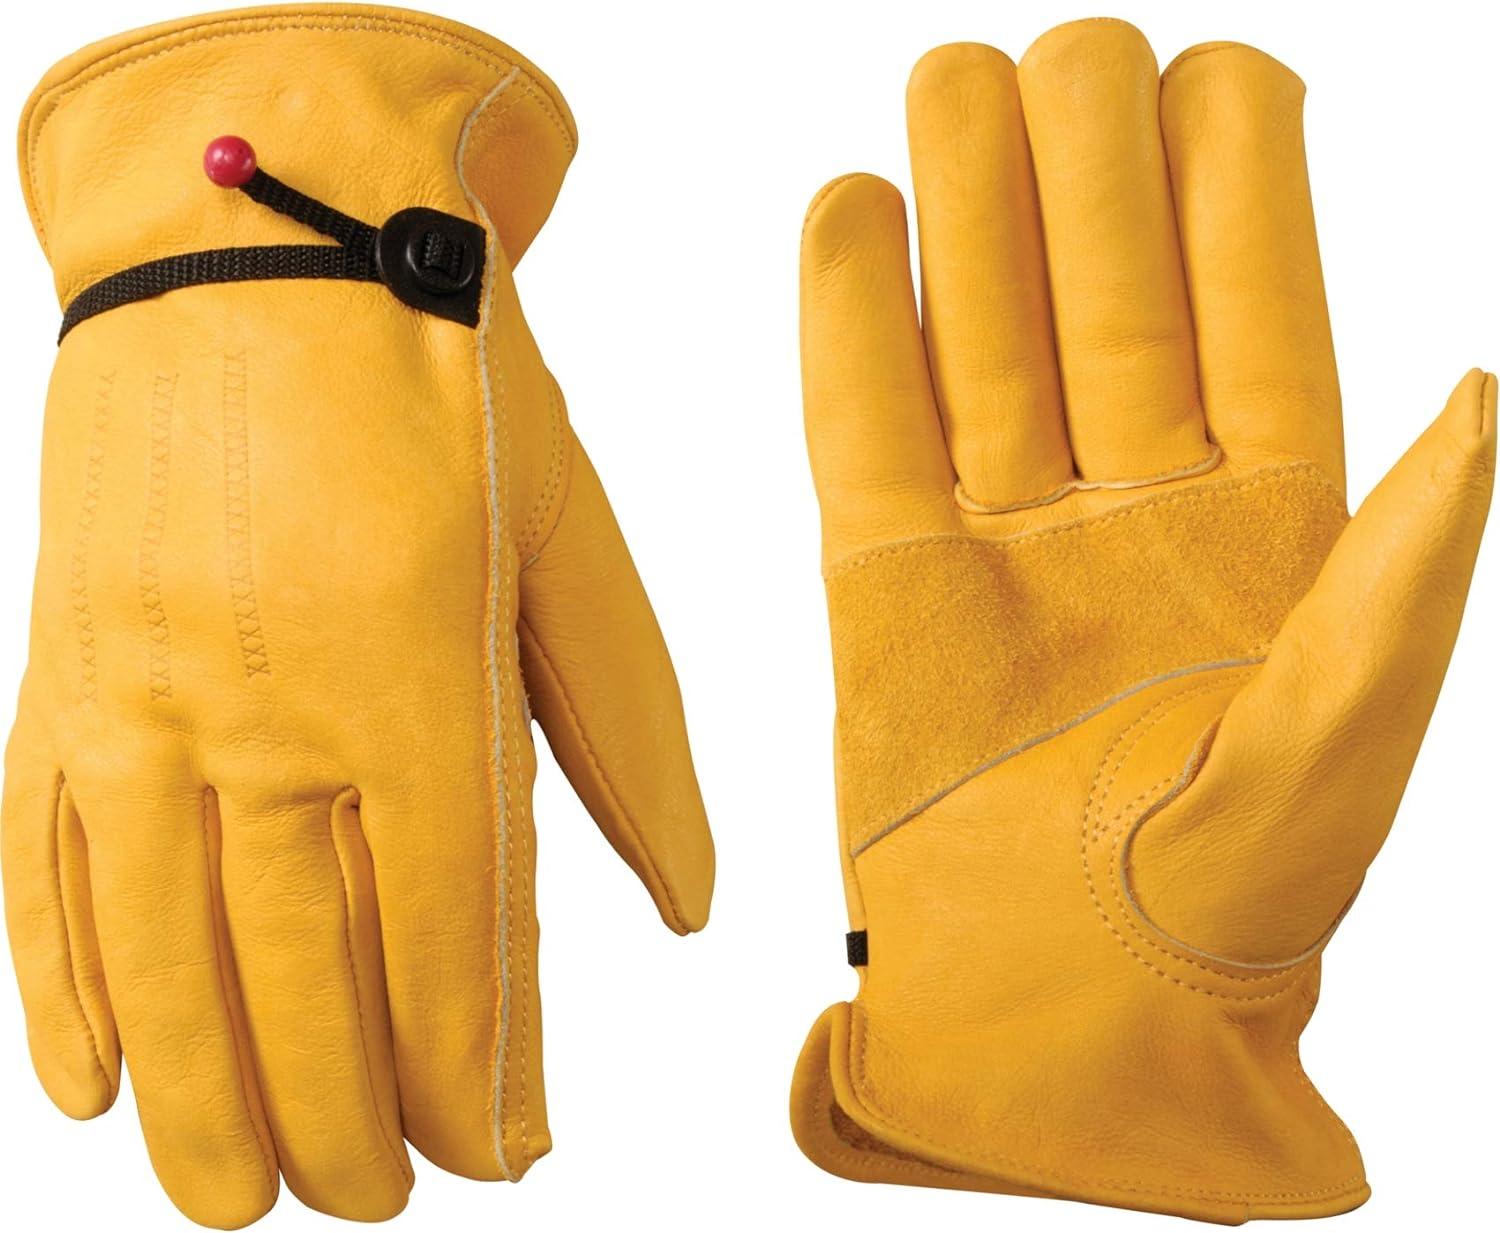 Wells Lamont 1132 Leather Work Gloves for $11.77